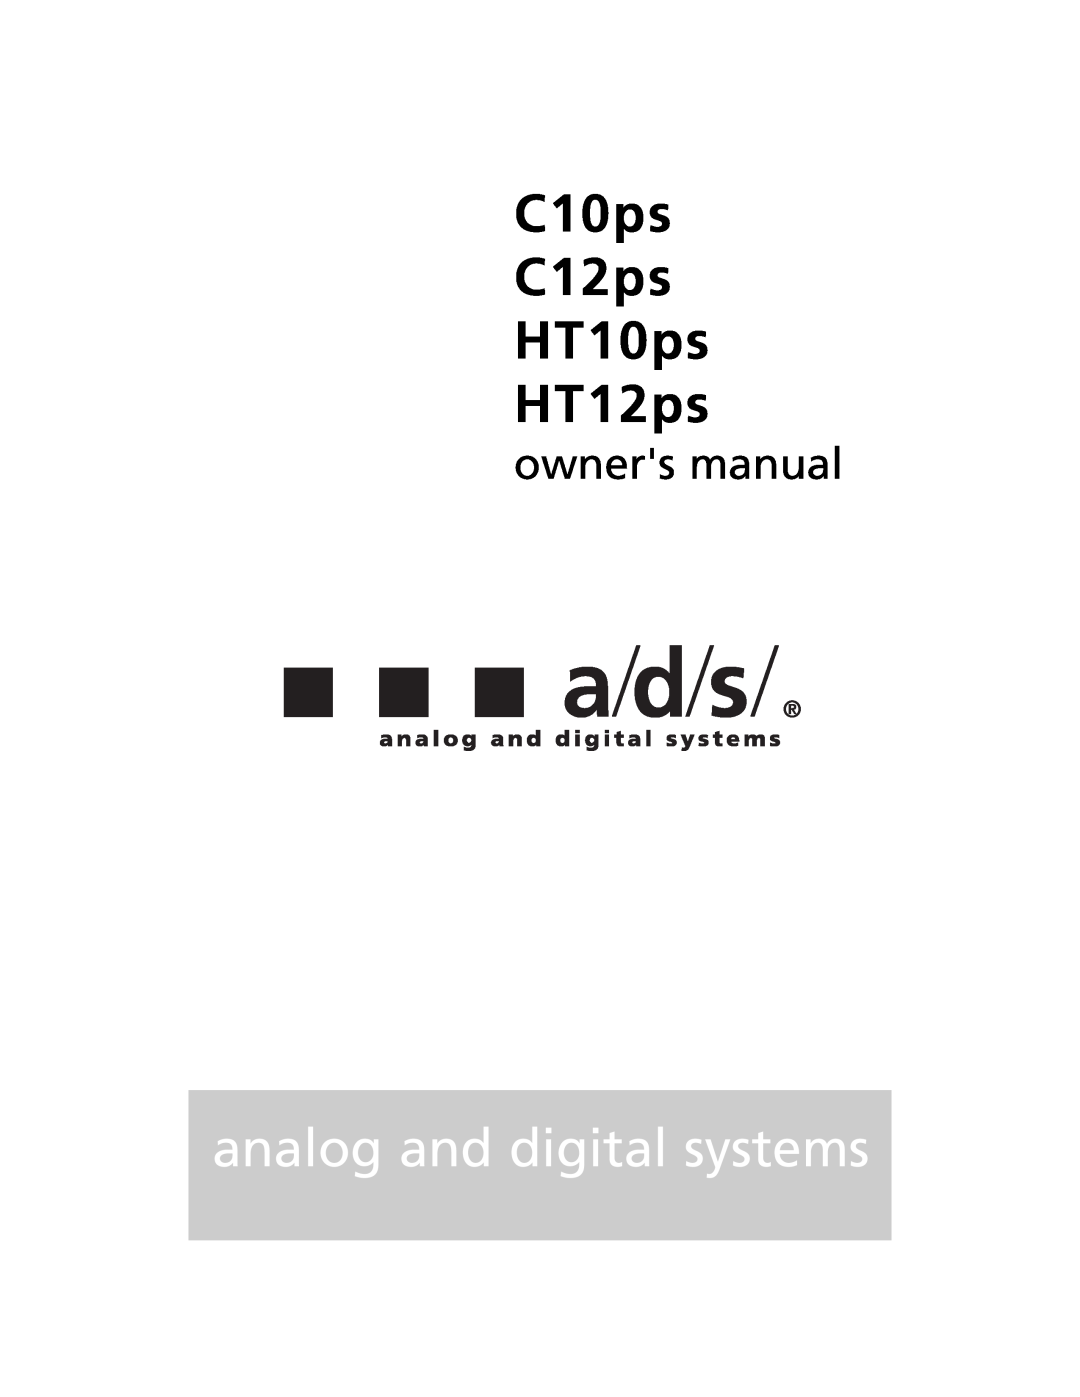 a/d/s/ owner manual C10ps C12ps HT10ps HT12ps, analog and digital systems 